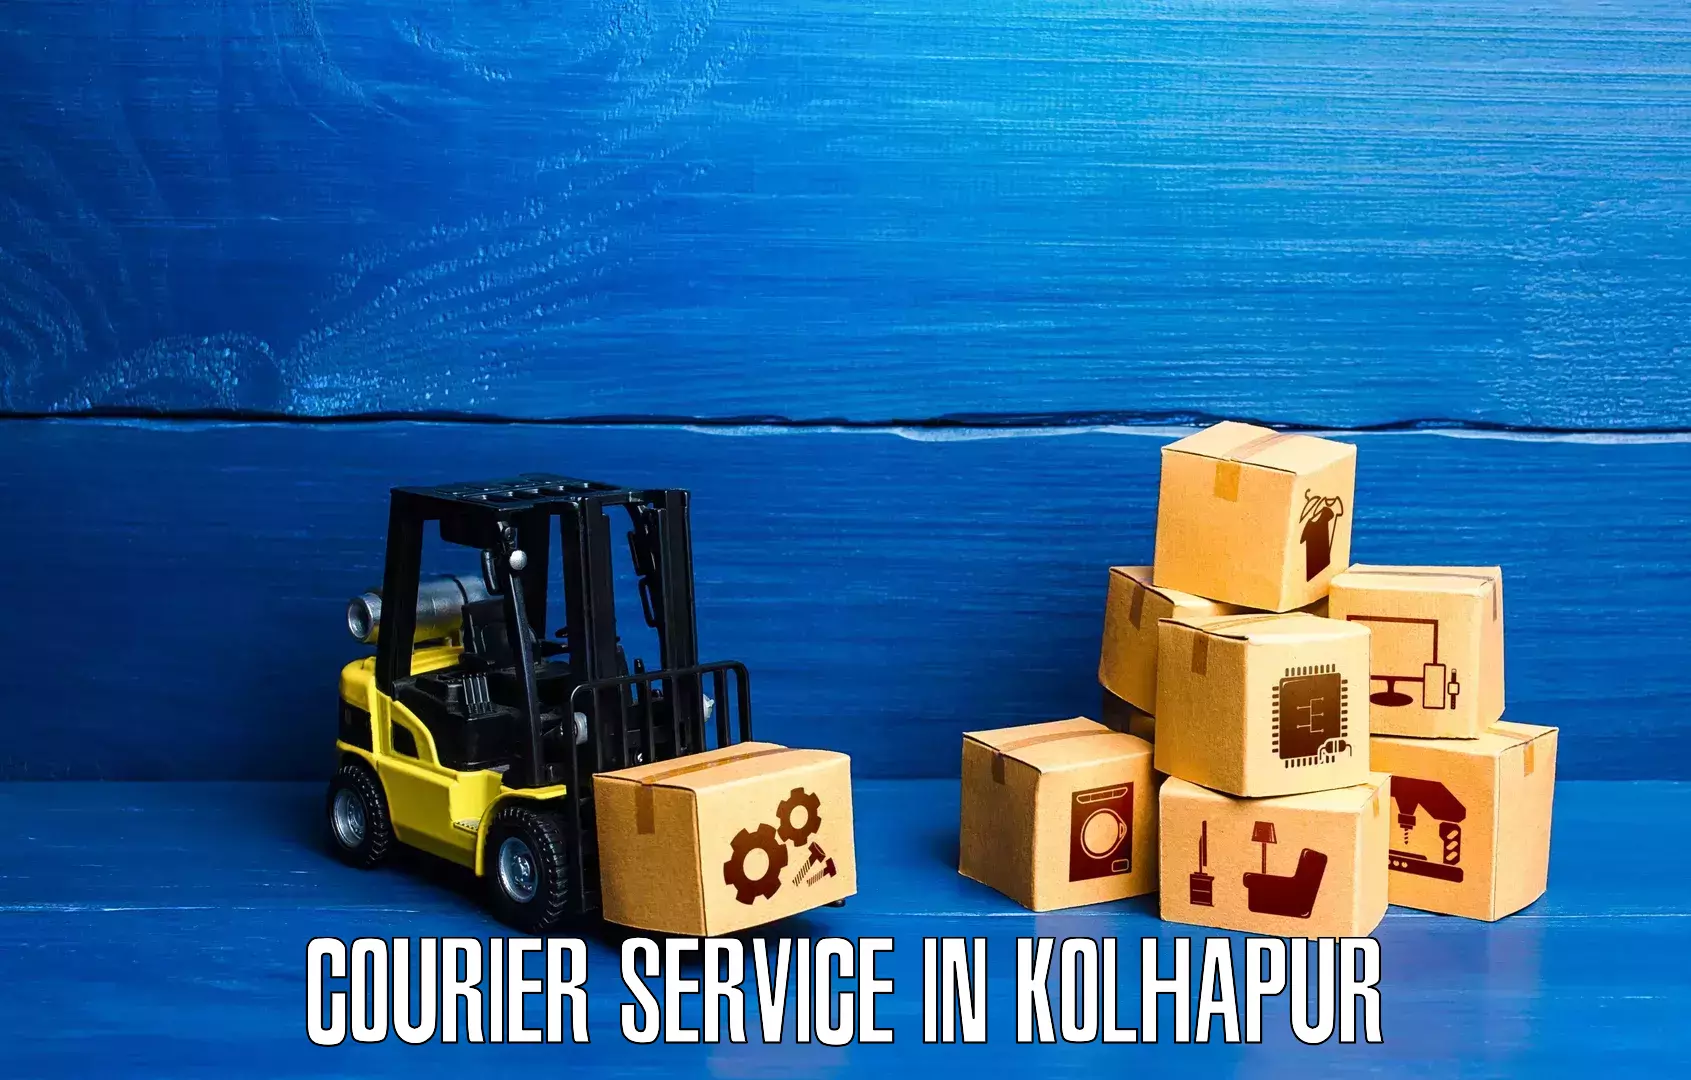 Customer-friendly courier services in Kolhapur